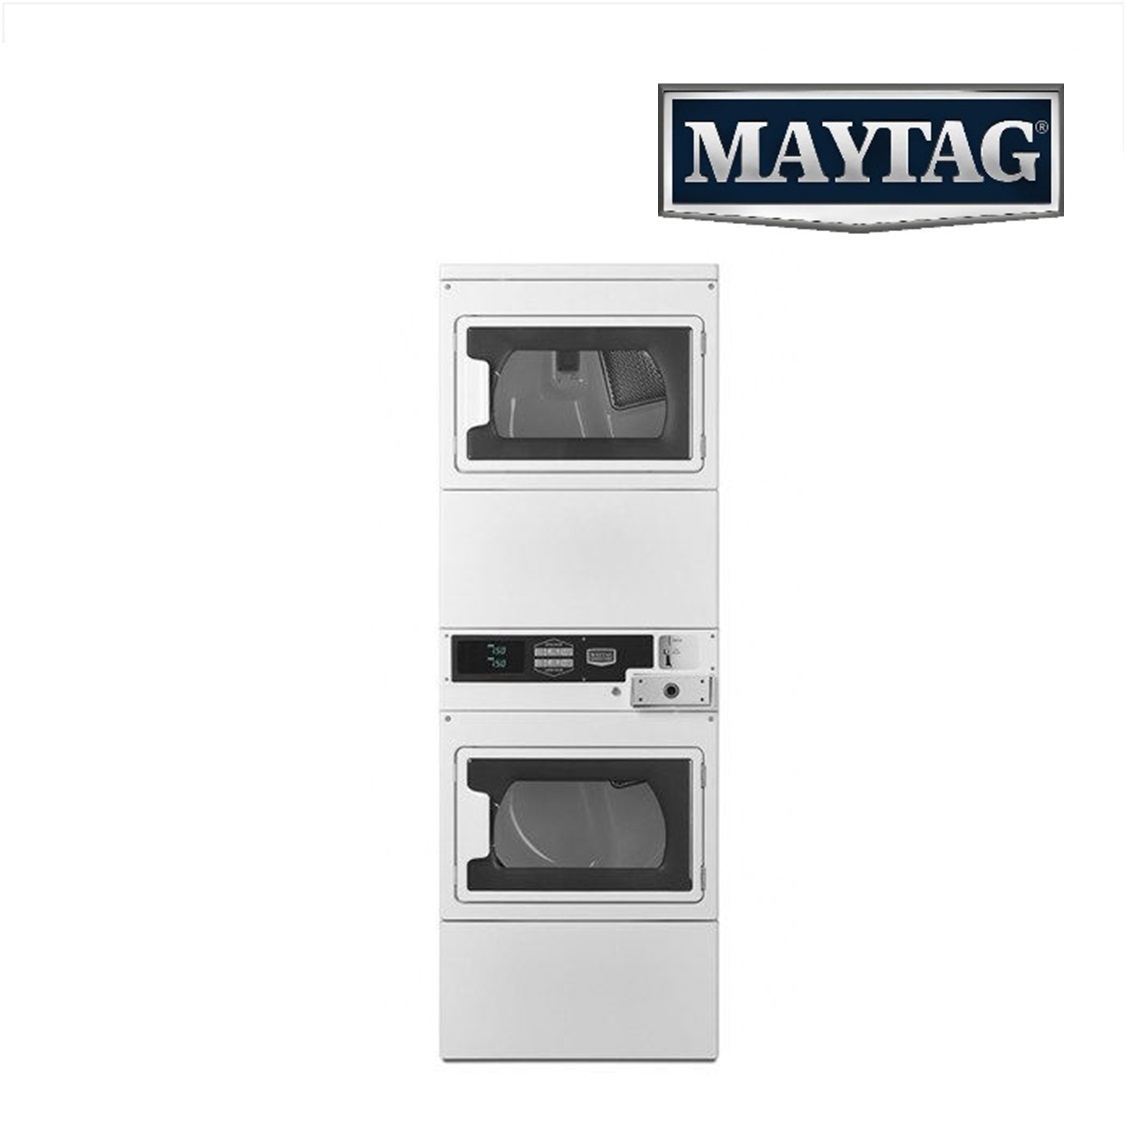 MAYTAG 11 kg. Single-Load Super Capacity Stacked Gas Dryer MLG27PD